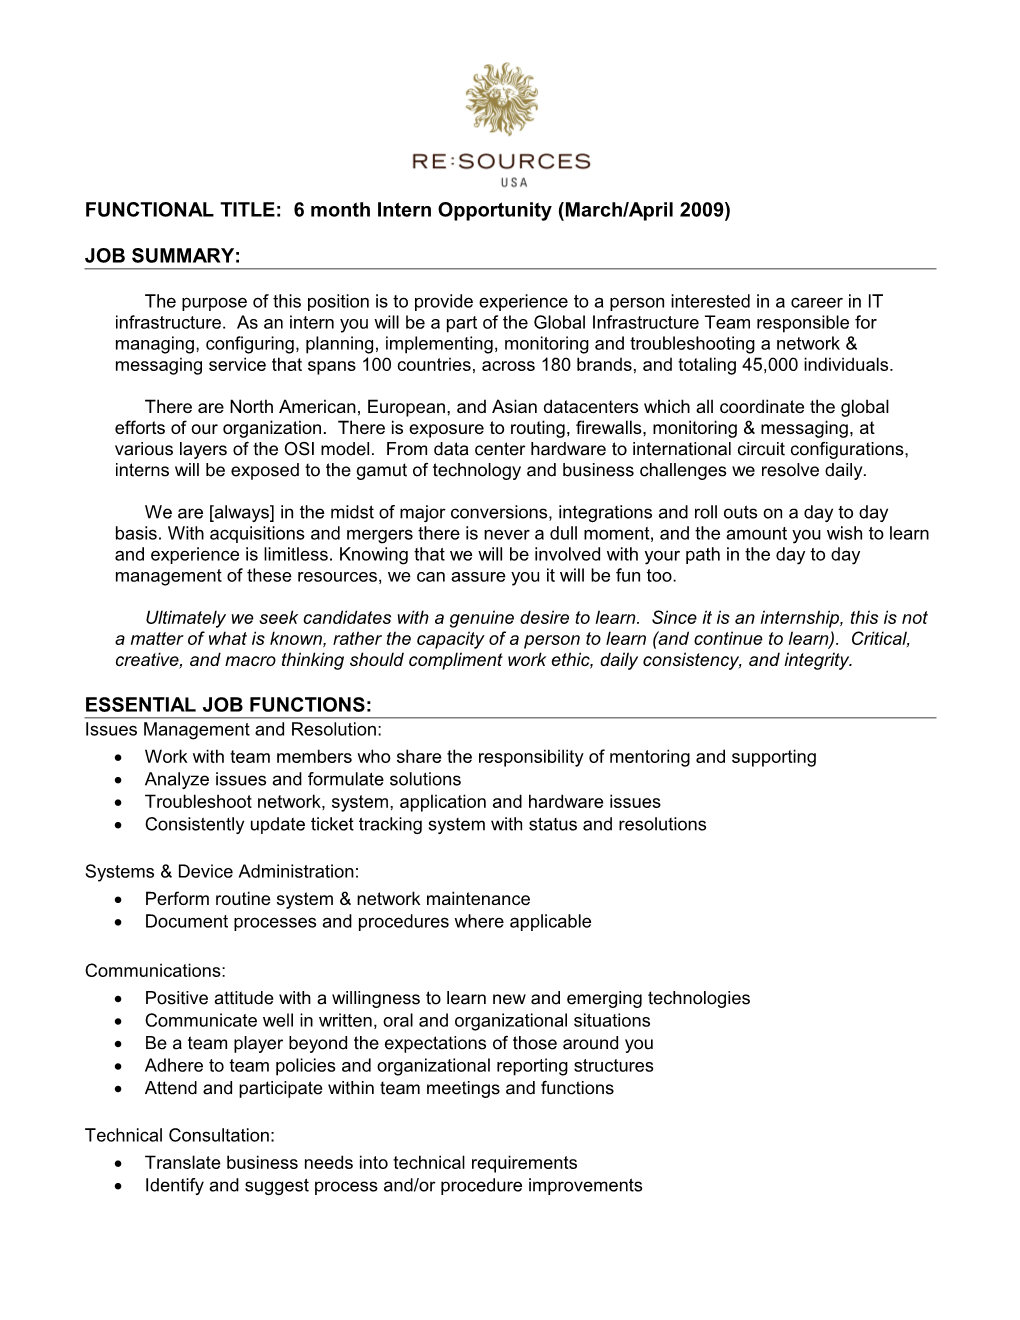 FUNCTIONAL TITLE: 6 Month Intern Opportunity (March/April 2009)